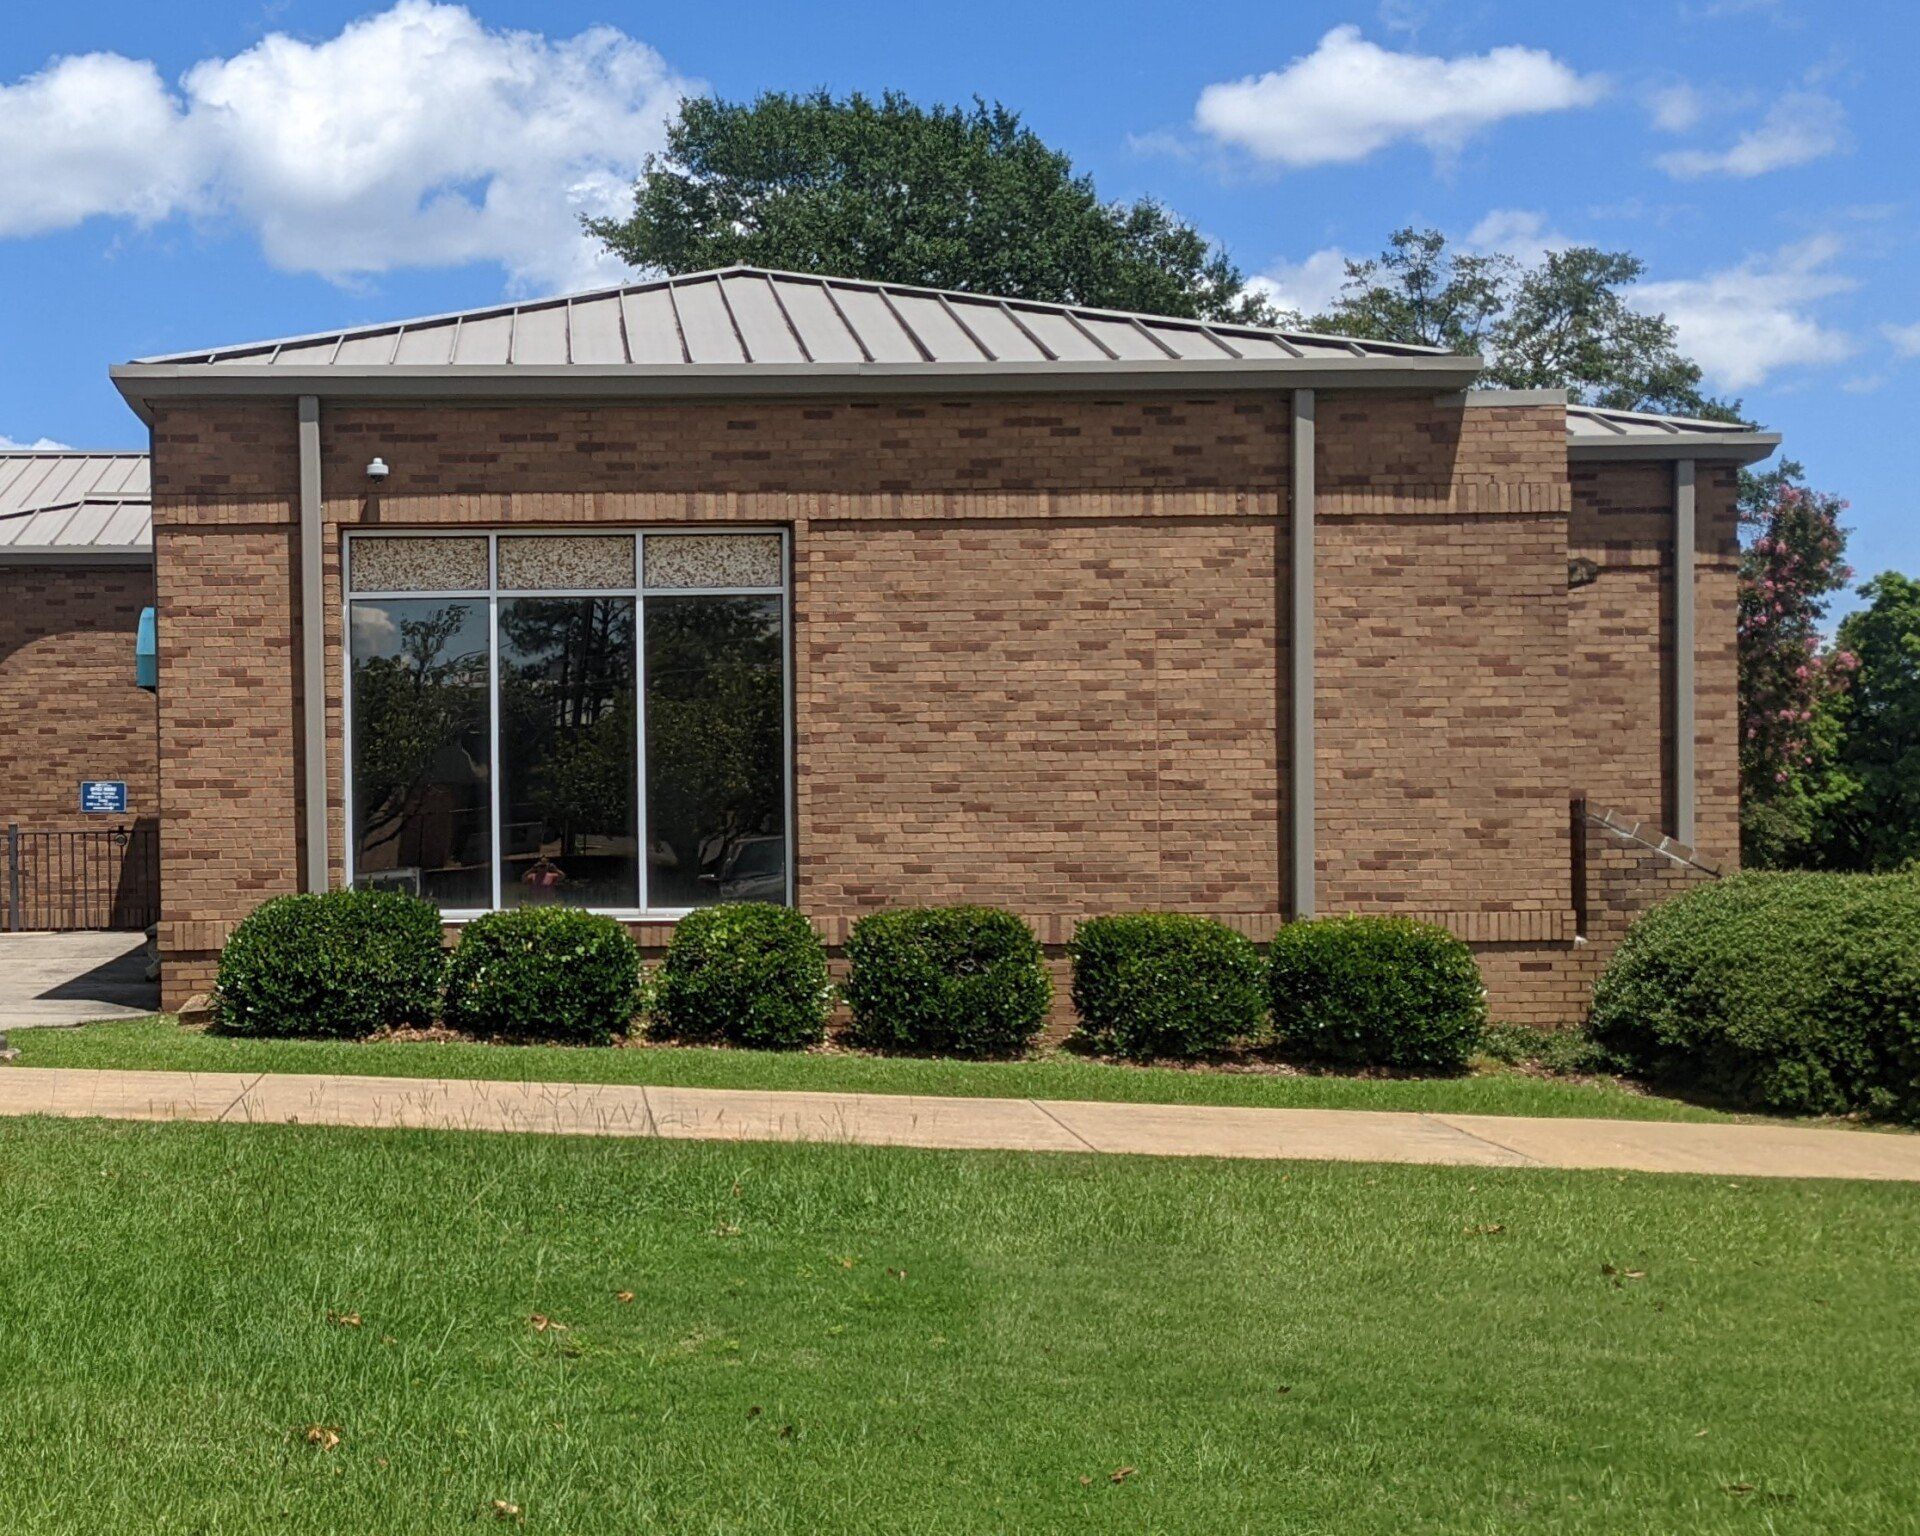 SPF Tint installed to windows stops hot Sun at Eastmont Church. Useless blinds allowing UV heat were removed for ideal office space in Montgomery, AL